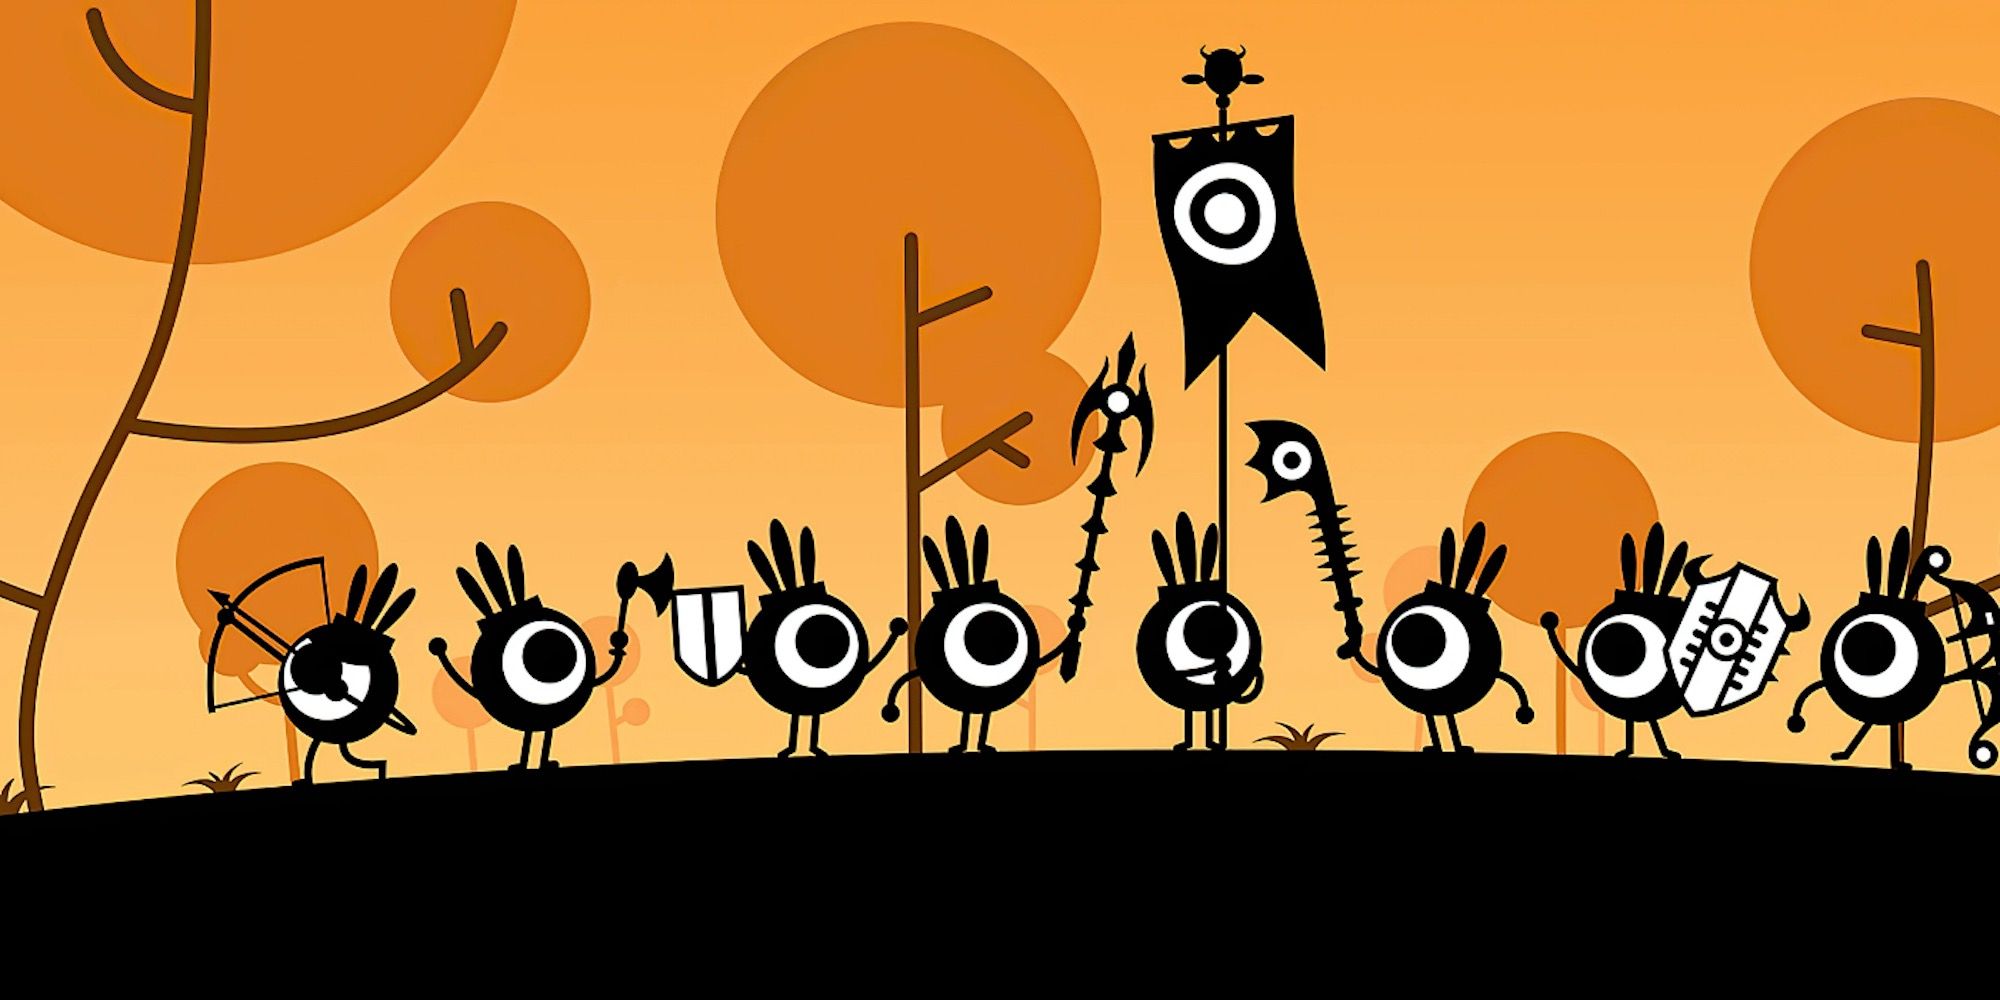 A cutscene featuring characters in Patapon